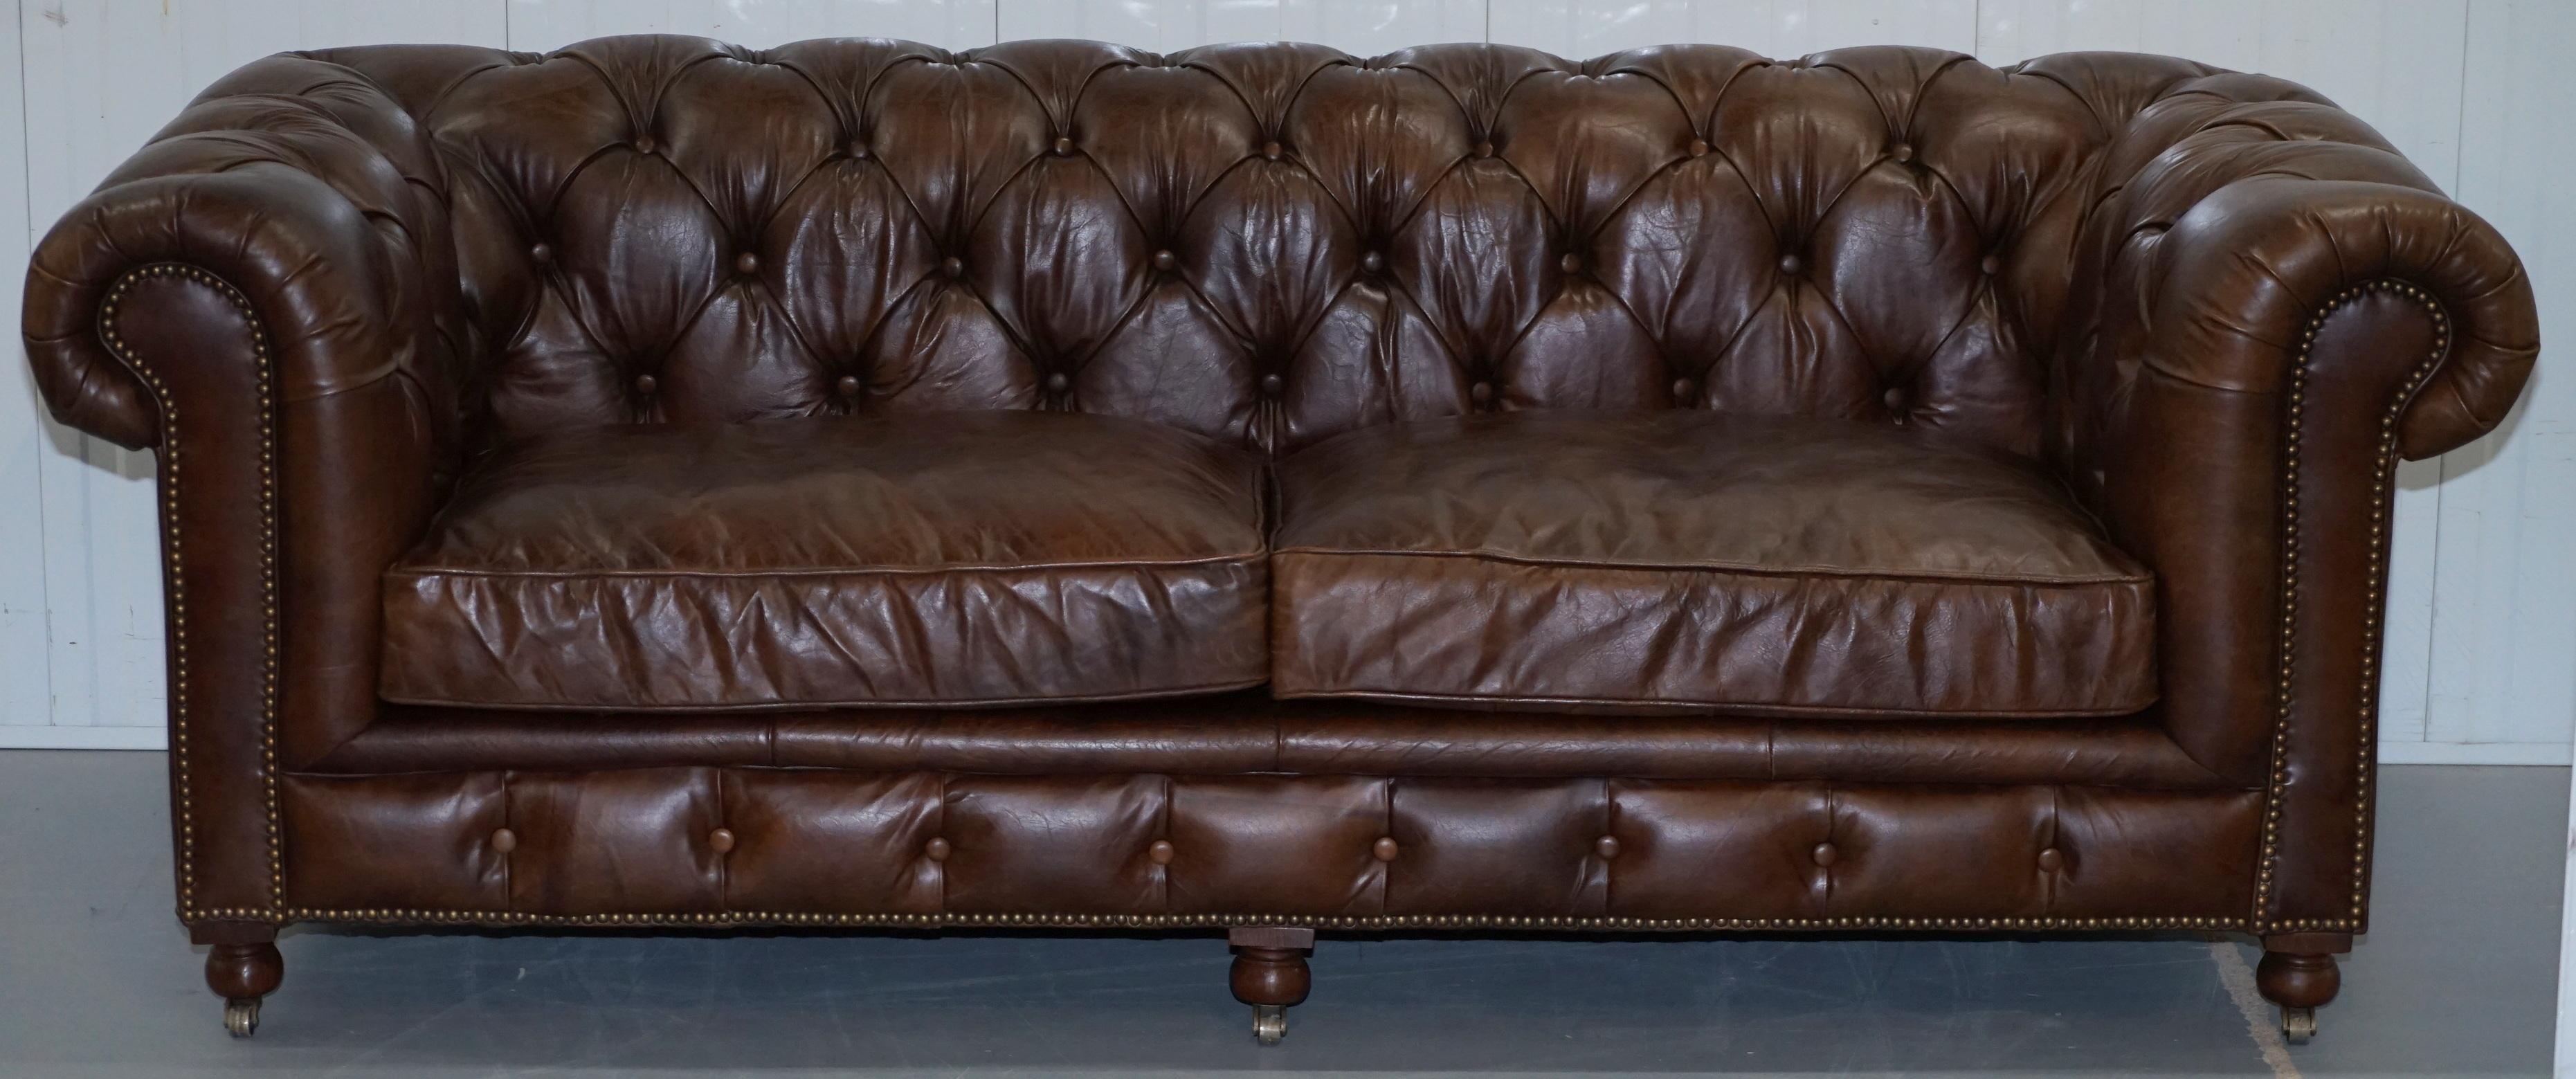 We are delighted to offer for sale this very nice Timothy Oulton Westminster aged brown leather Chesterfield sofa RRP £4425

We have cleaned waxed and polished them from top to bottom, there might be the odd little mark from transport but mostly